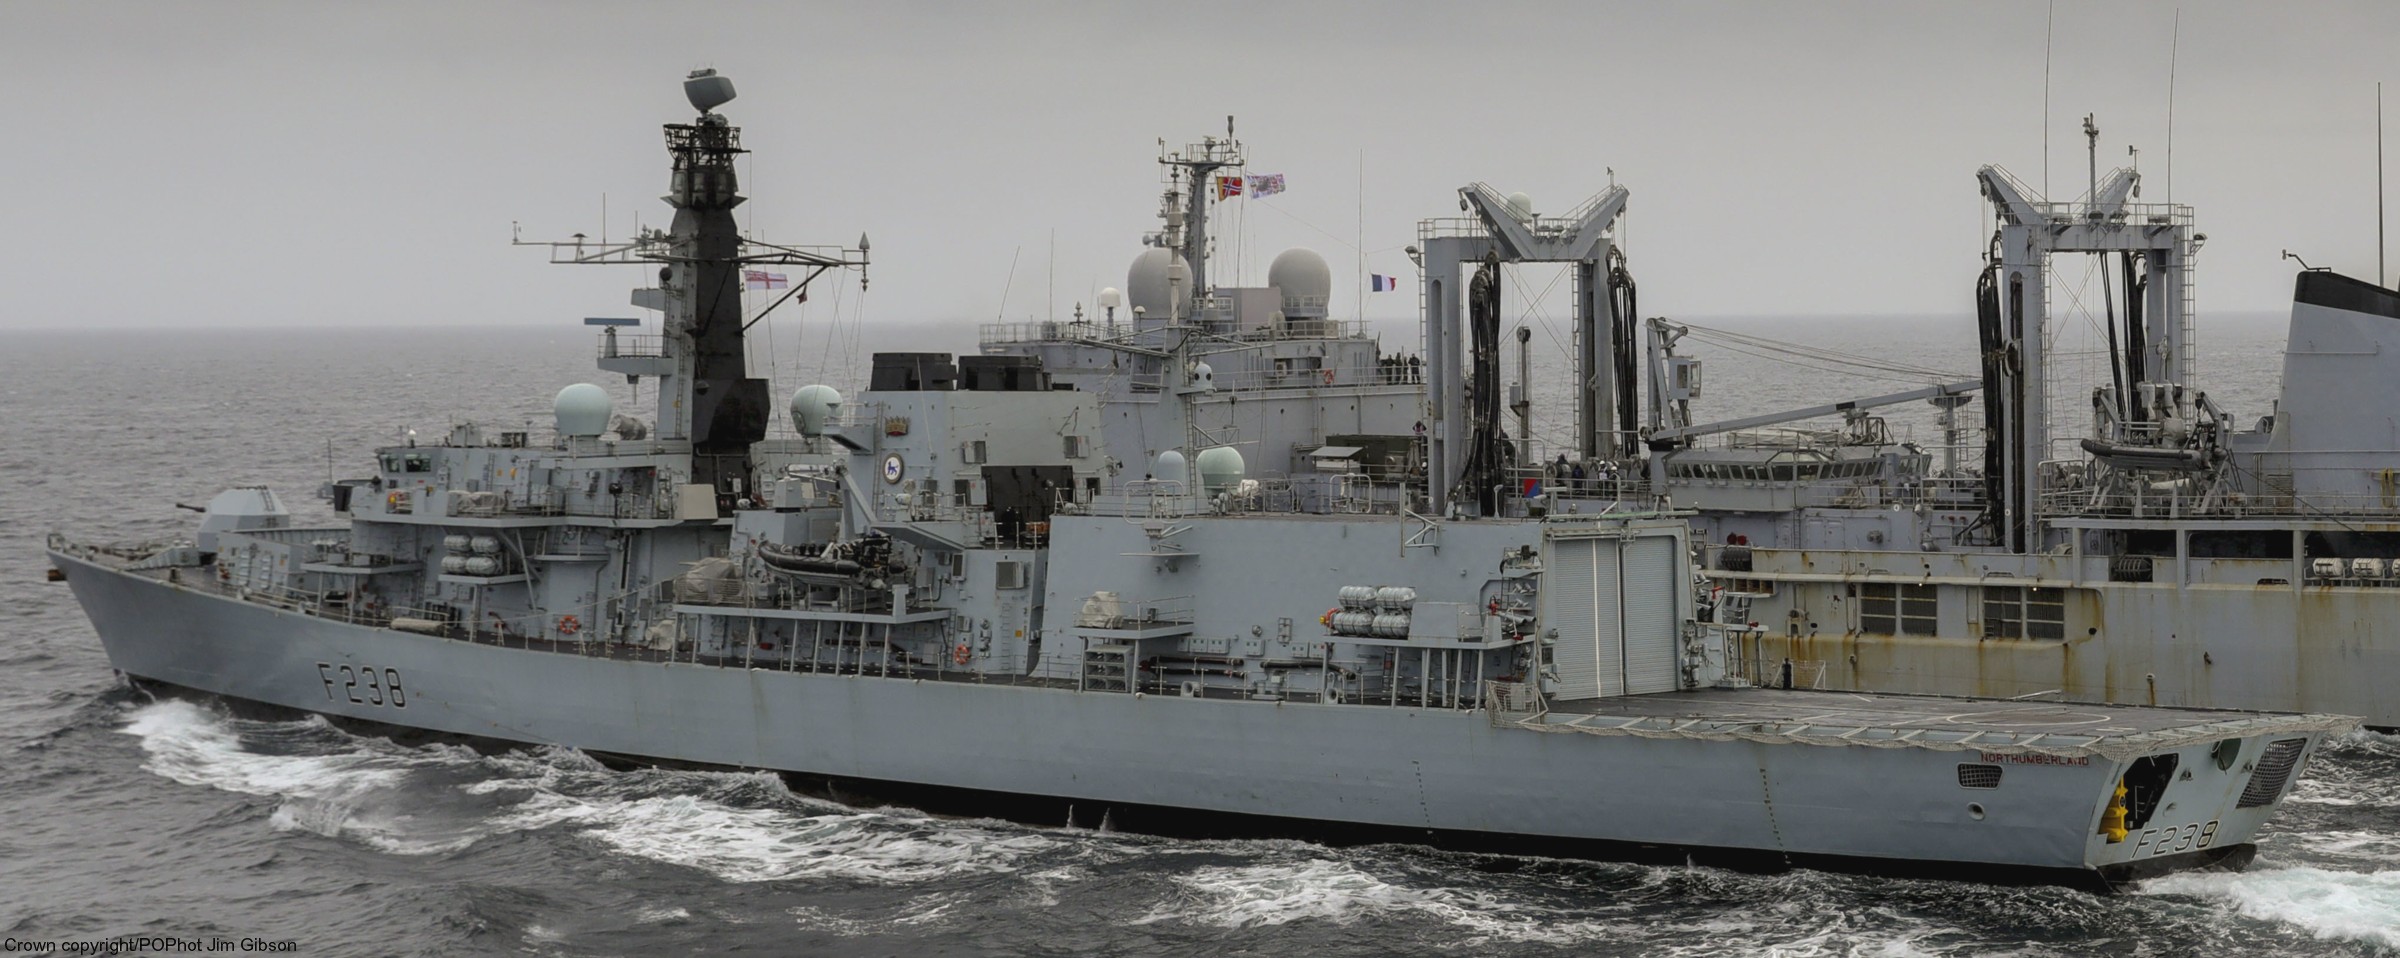 f-238 hms northumberland type 23 duke class guided missile frigate ffg royal navy 57